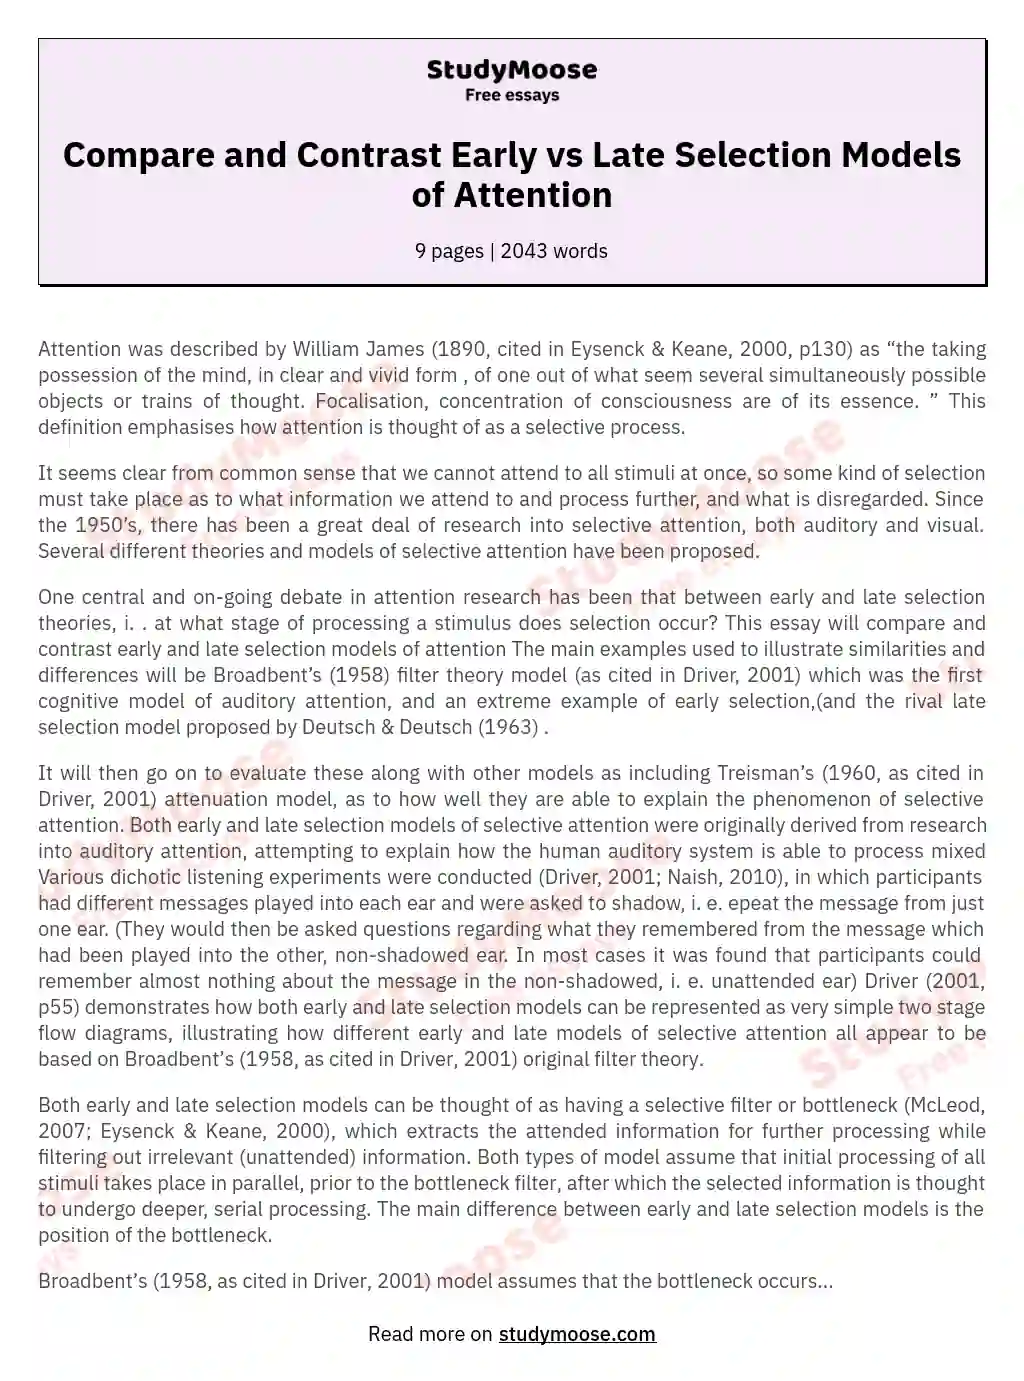 Compare and Contrast Early vs Late Selection Models of Attention essay